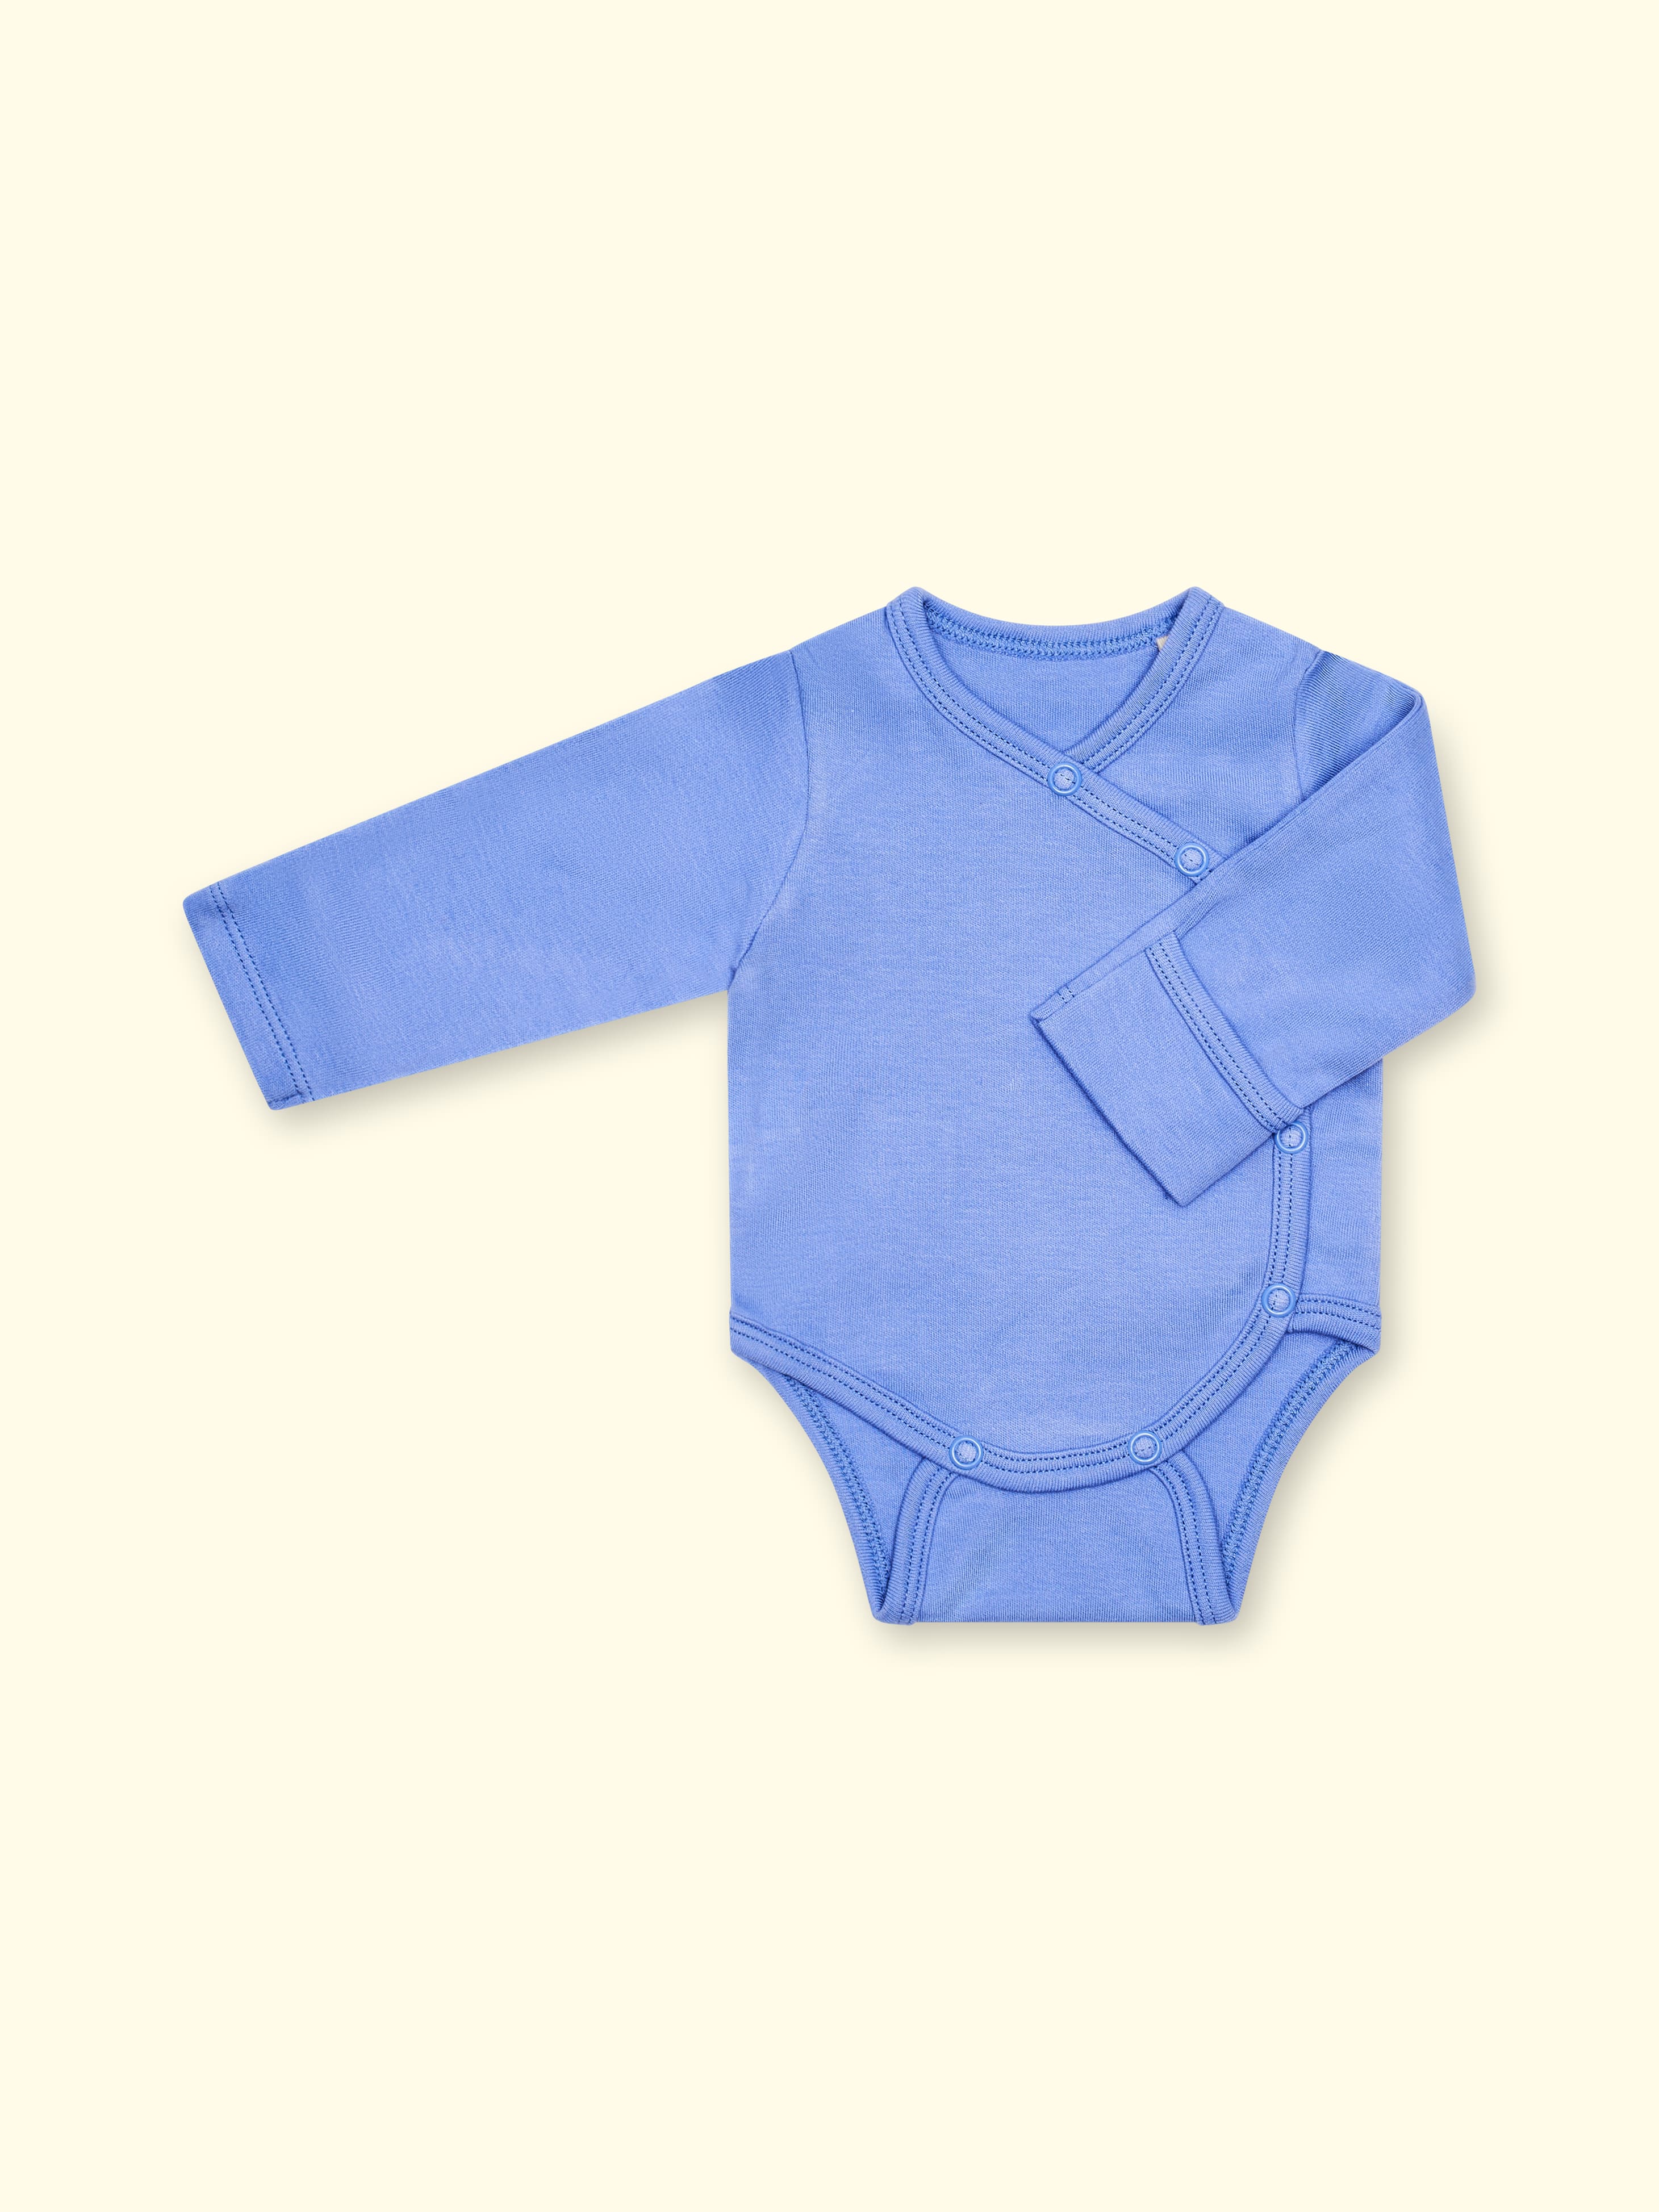 Adaptive bodysuit with scratch protection for premature babies and babies